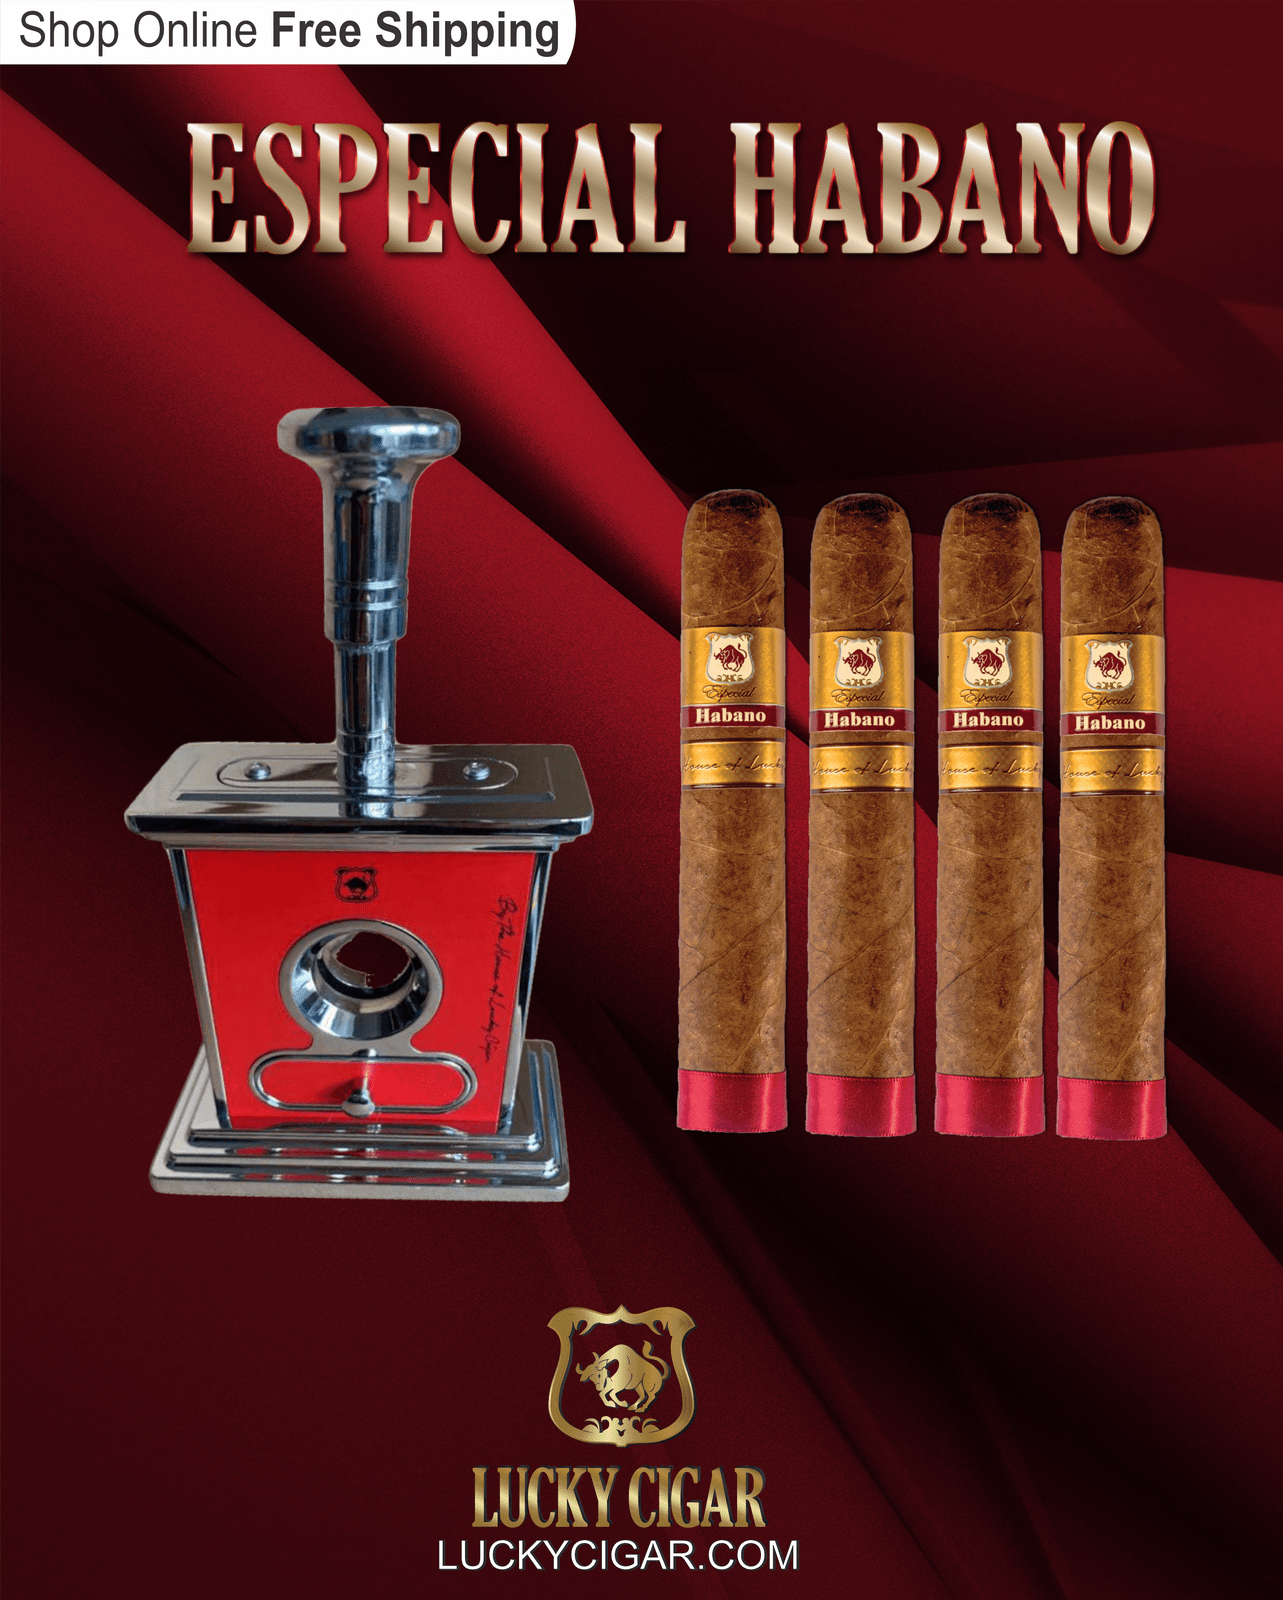 Habano Cigars: Especial Habano by Lucky Cigar: Set of 4 Cigars 4 Toro with Cutter